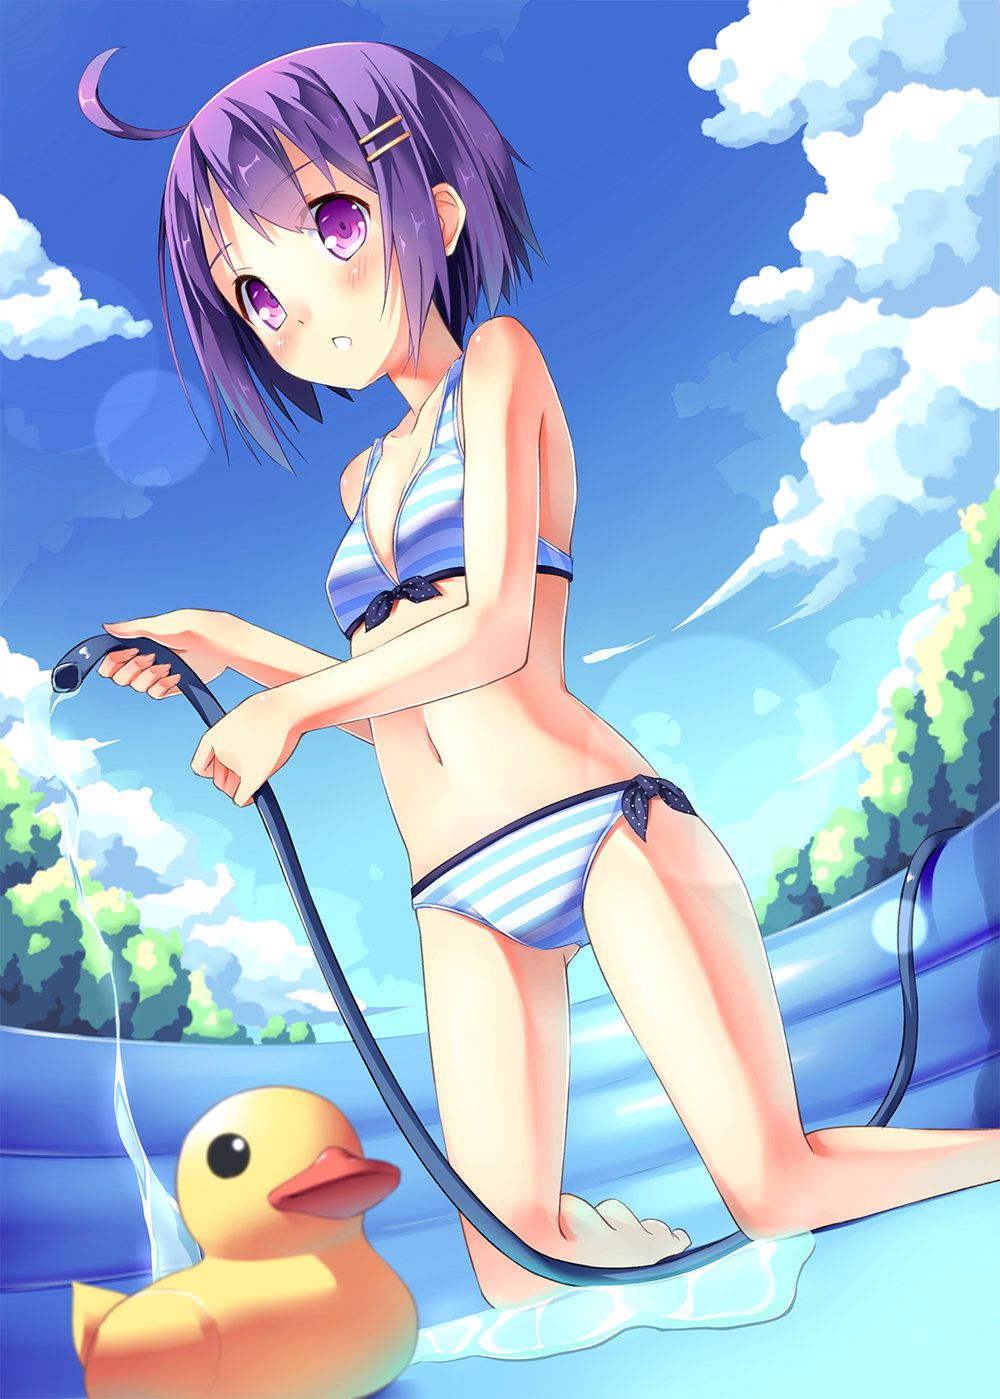 I want to see a swimsuit image. 3